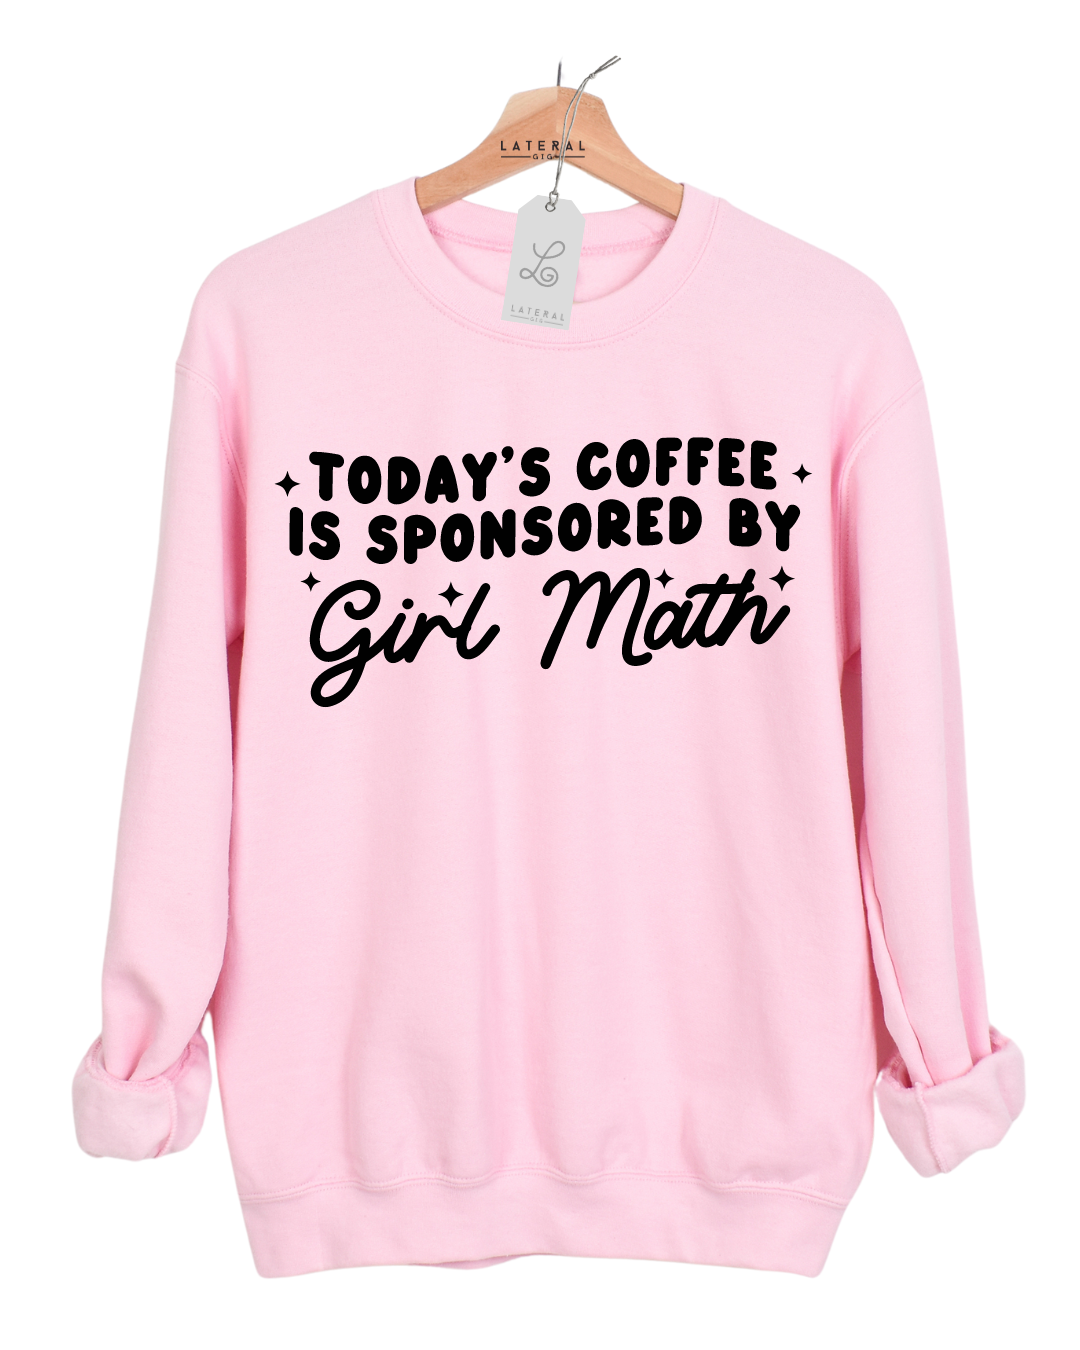 Today's Coffee is Sponsored By Girl Math